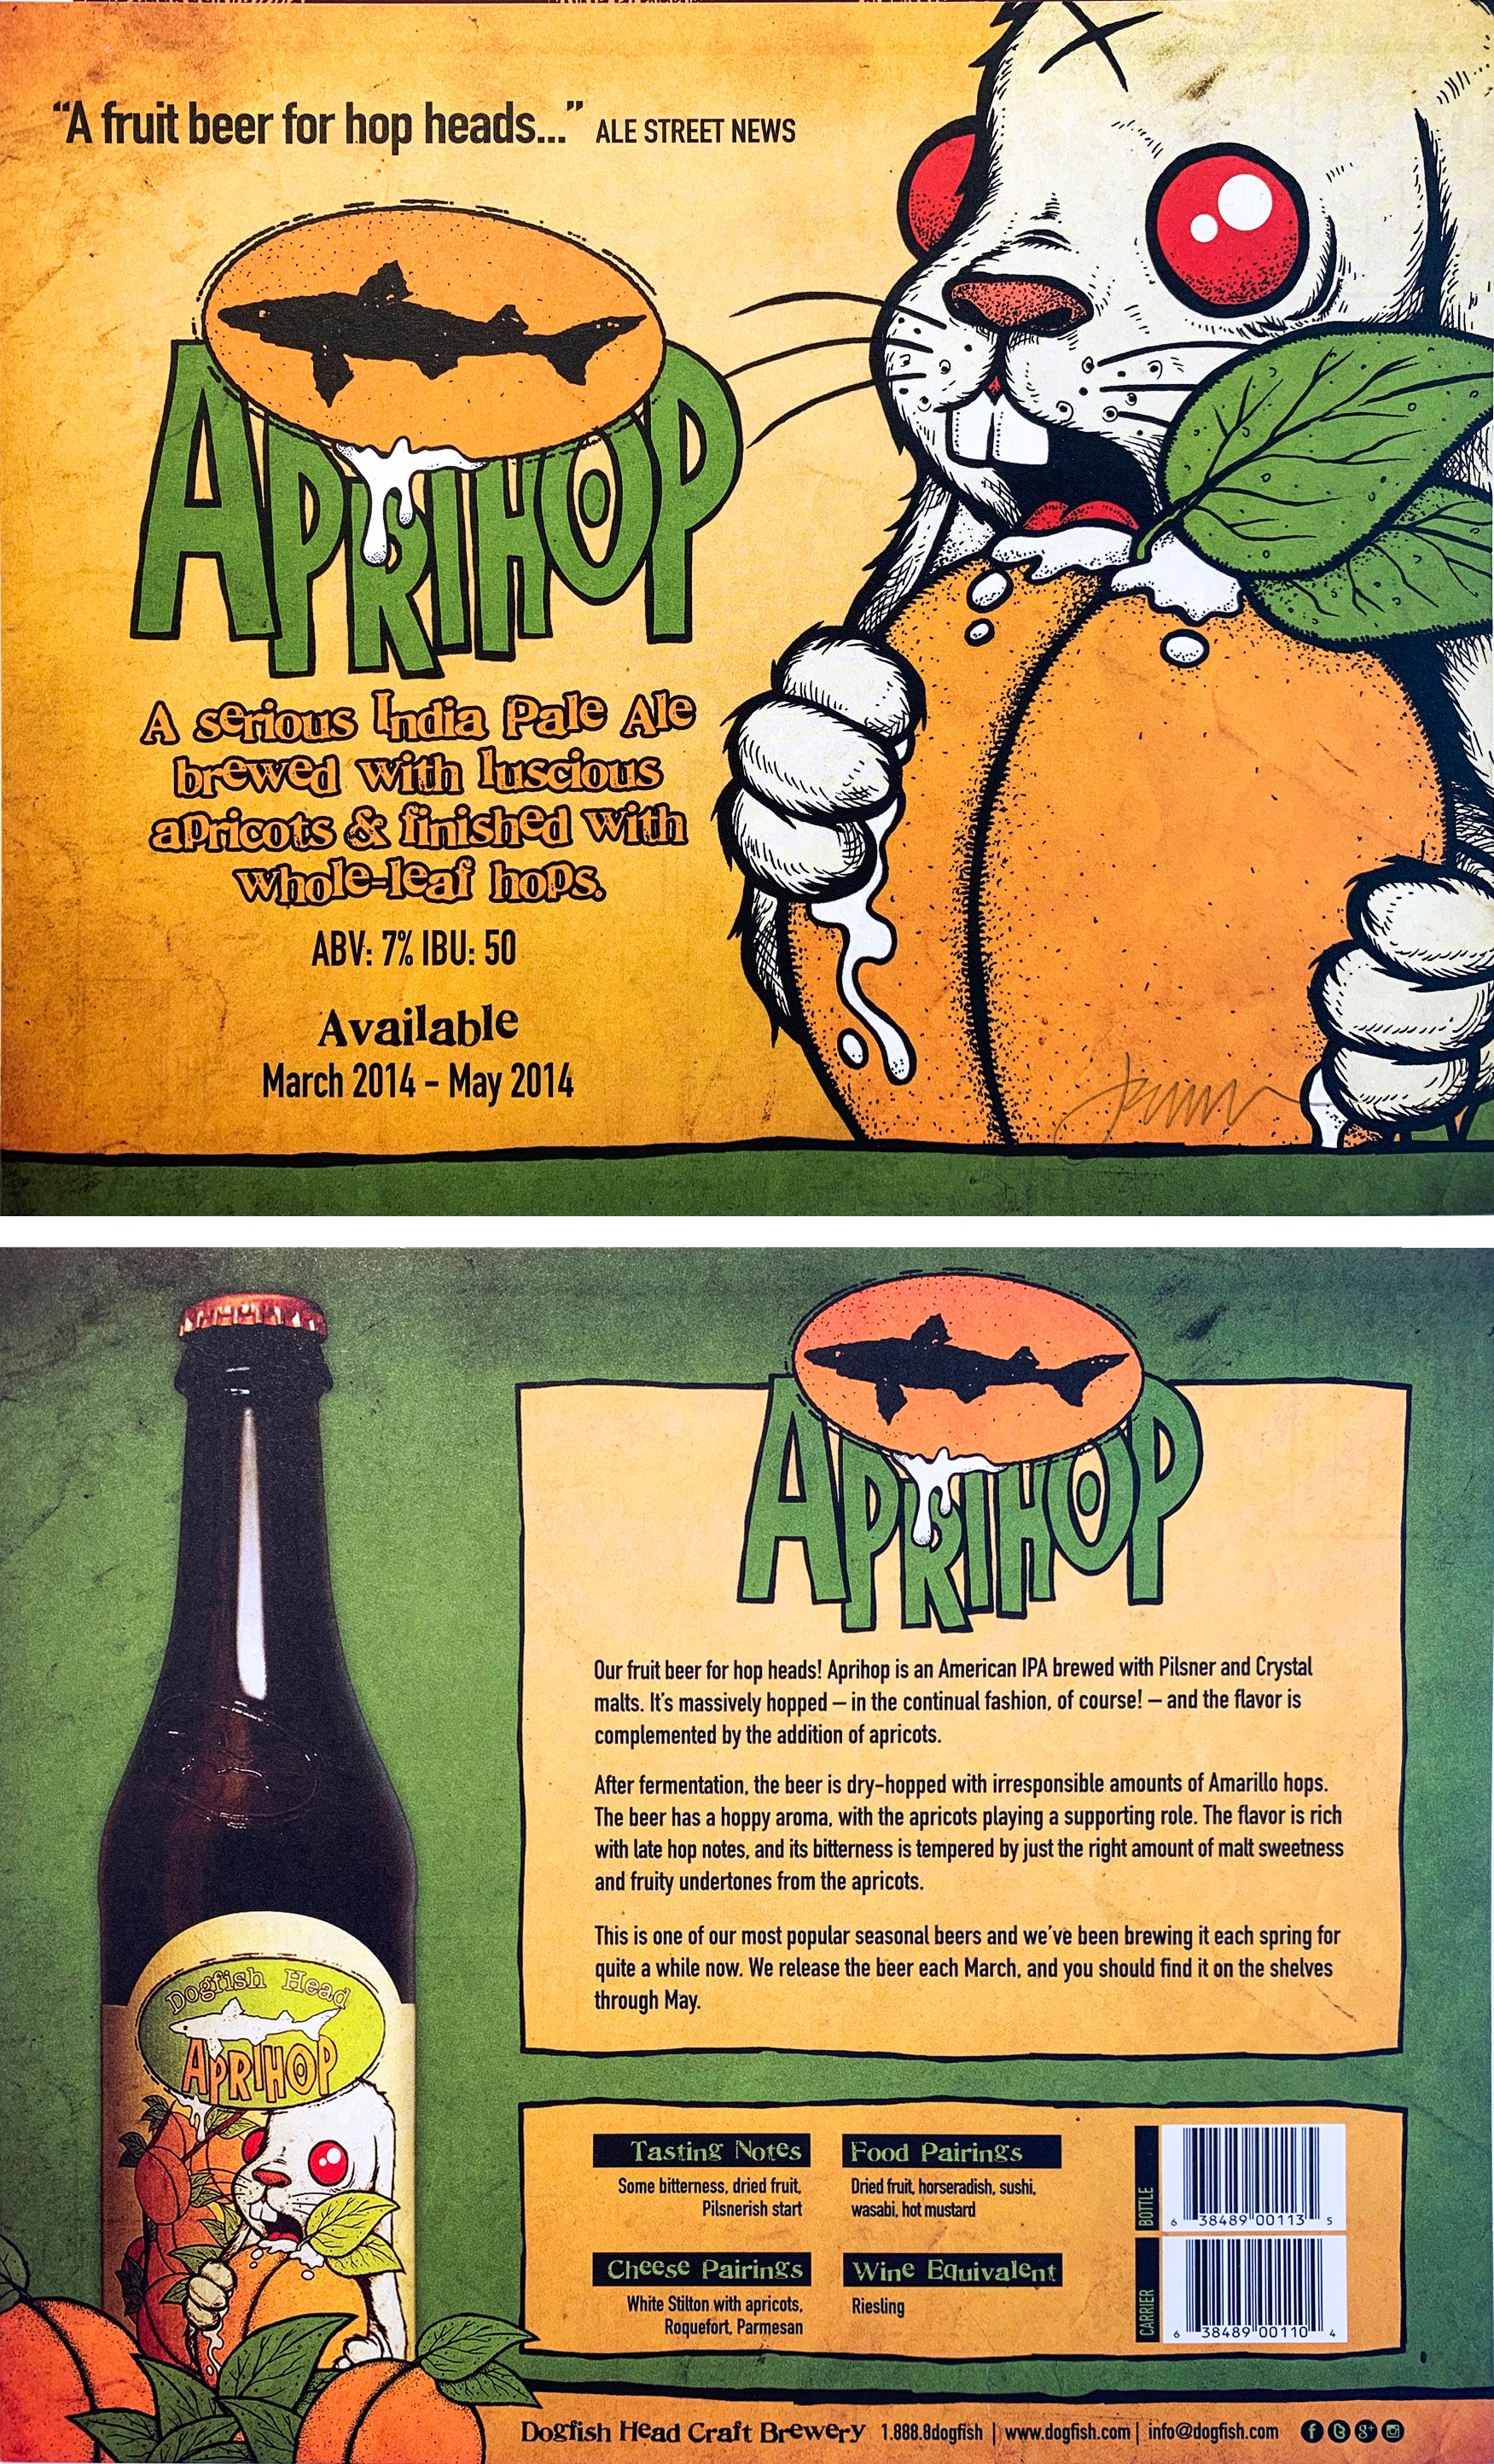 Dogfish Head Label Ad, release of Aprihop signed by Jermaine